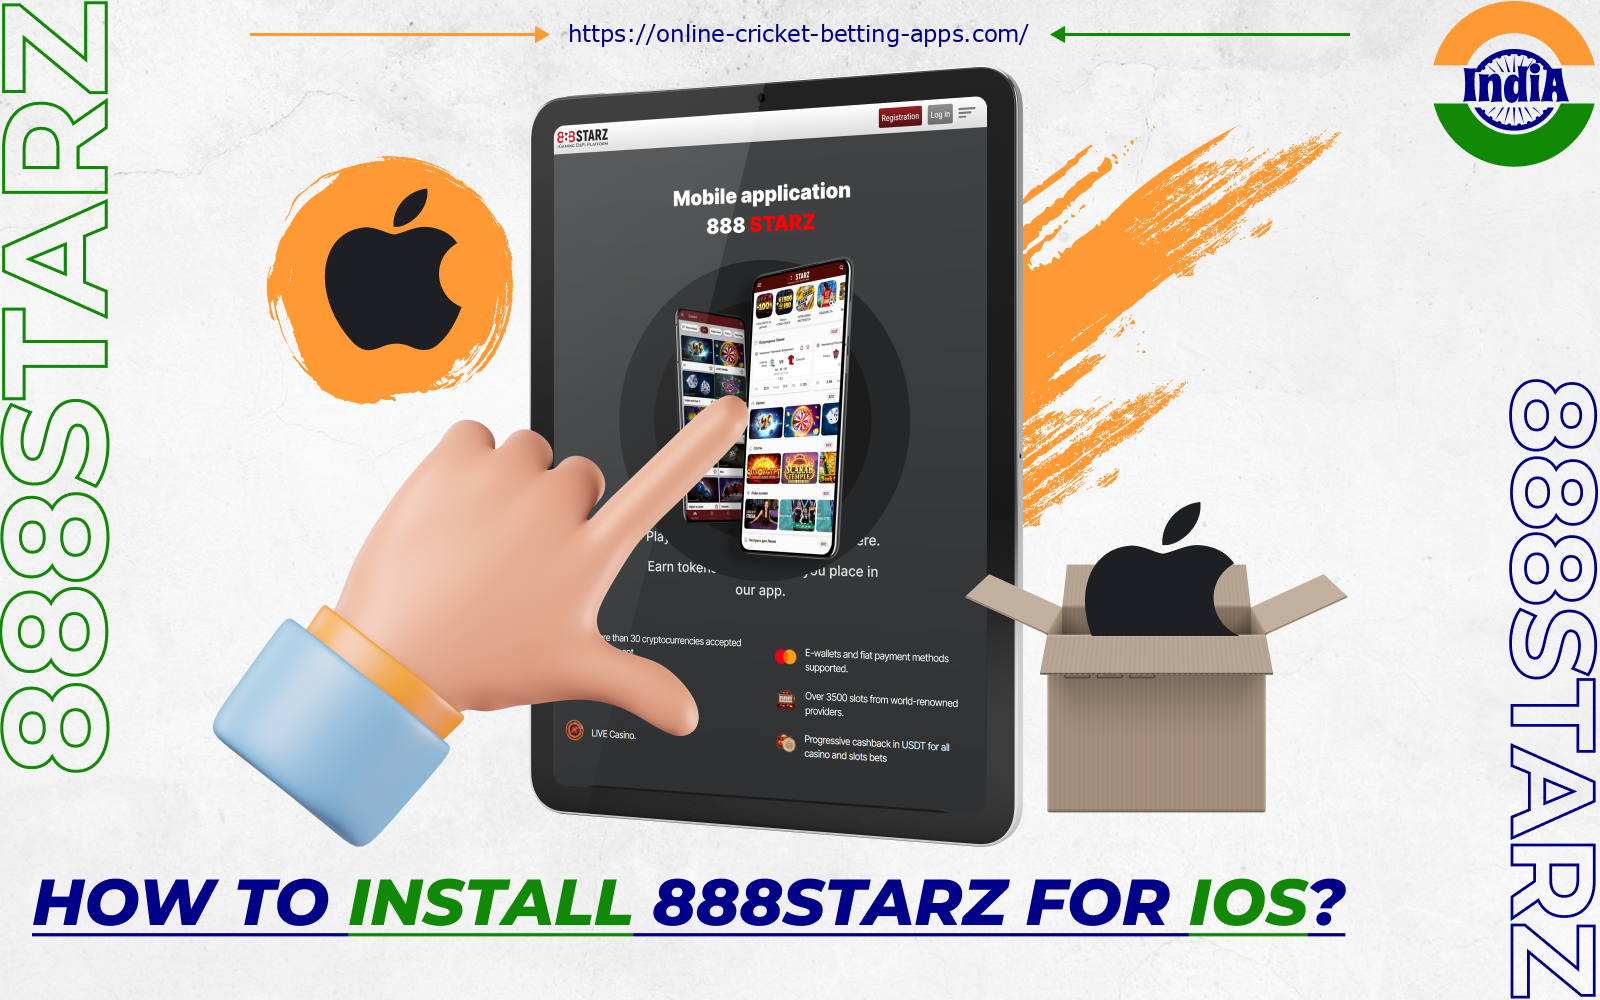 After installing the 888starz app on iOS, players from India will be able to play anywhere and anytime